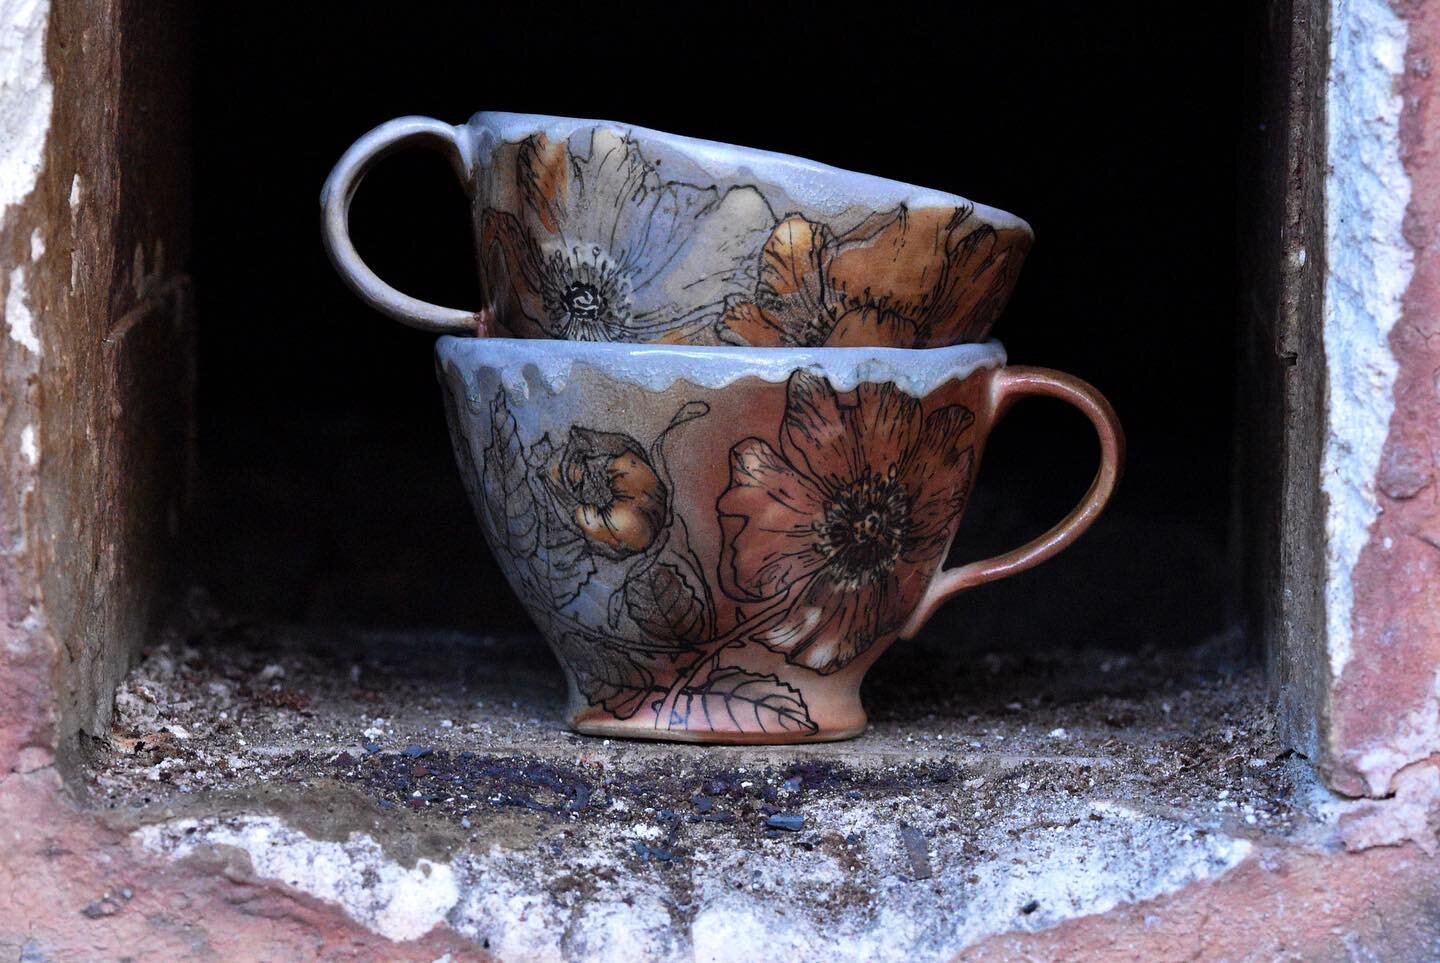 Woodfired Pinched Teacups with Wild Roses (photos of Coneflower &amp; Monarch Teacups in stories, if you want to check those out&hellip;)

These photos were taken in the opening of the firebox to our wood kiln. This is where the wood gets added to fe